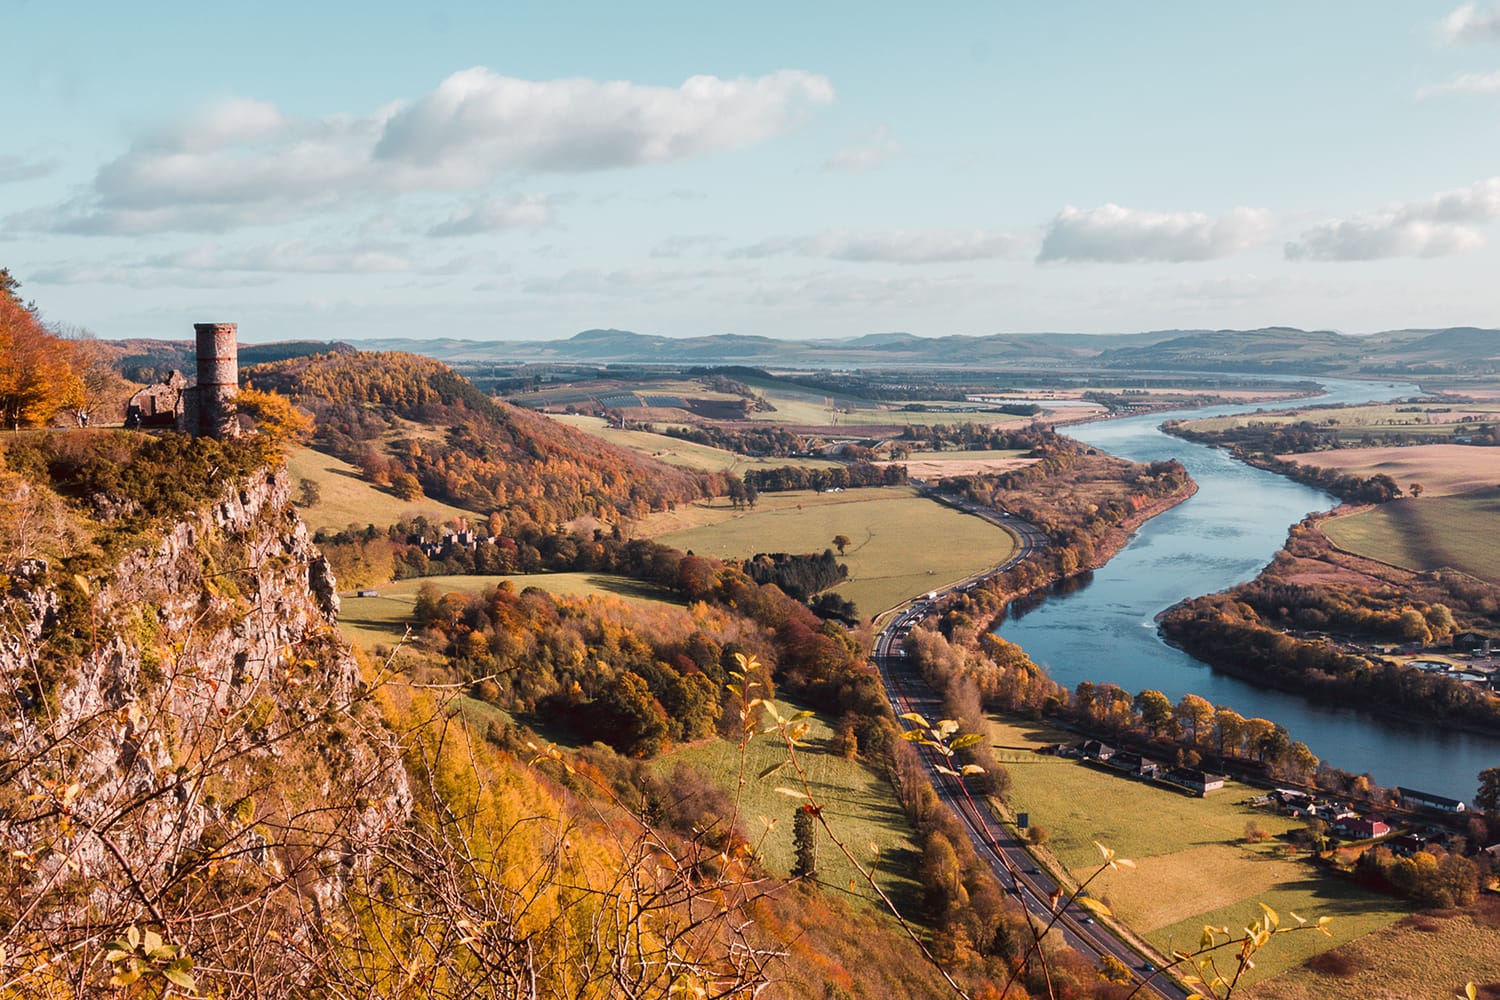 Kinnoull Hill tower ruins, Perth Scotland, overlooking the River Tay on a clear Autumn day